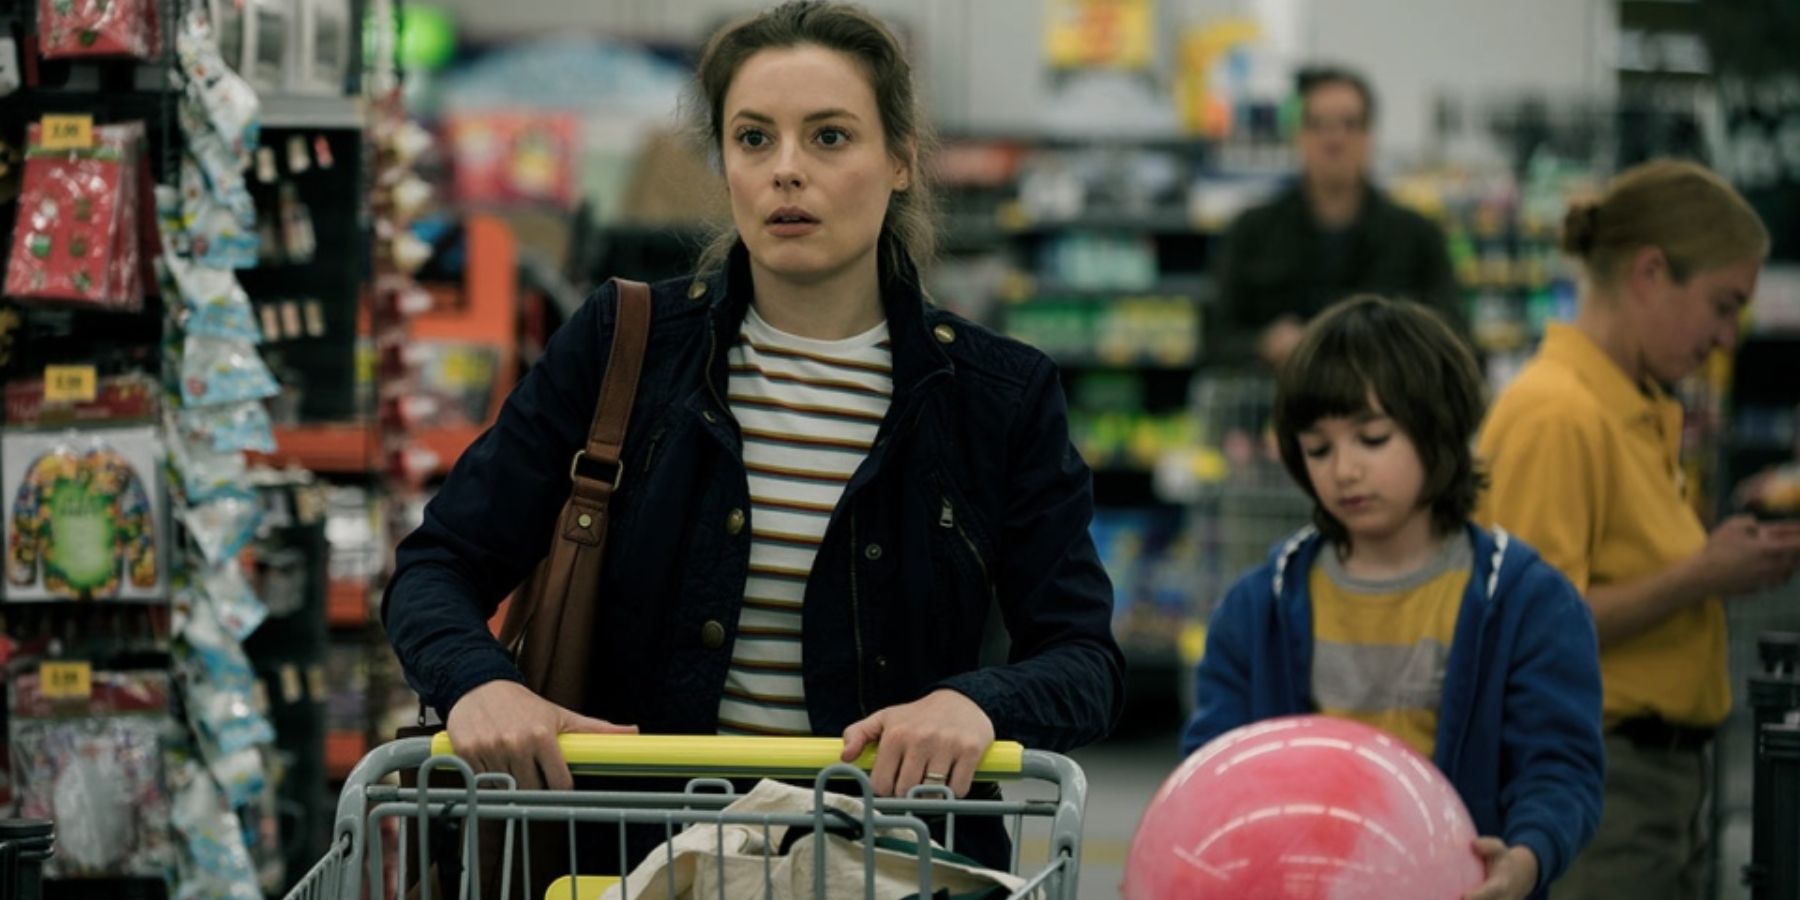 Gillian Jacobs as Sarah in a supermarket with Azhy Robertson as Oliver in Come Play